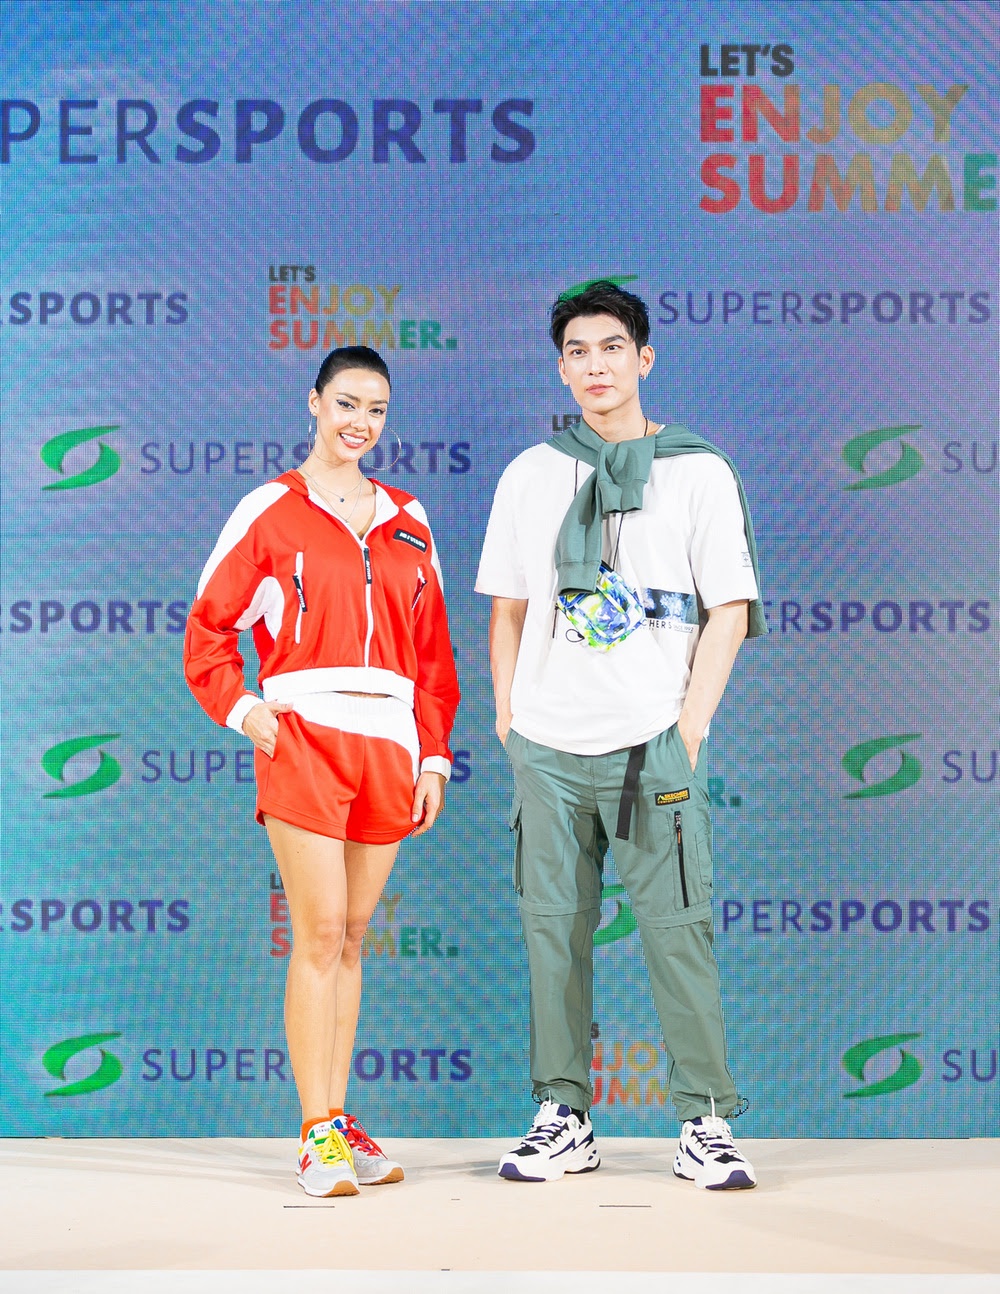 Supersports Heats Up the Summer Season with the Launch of the Supersports Let's Enjoy Summer 2022 campaign